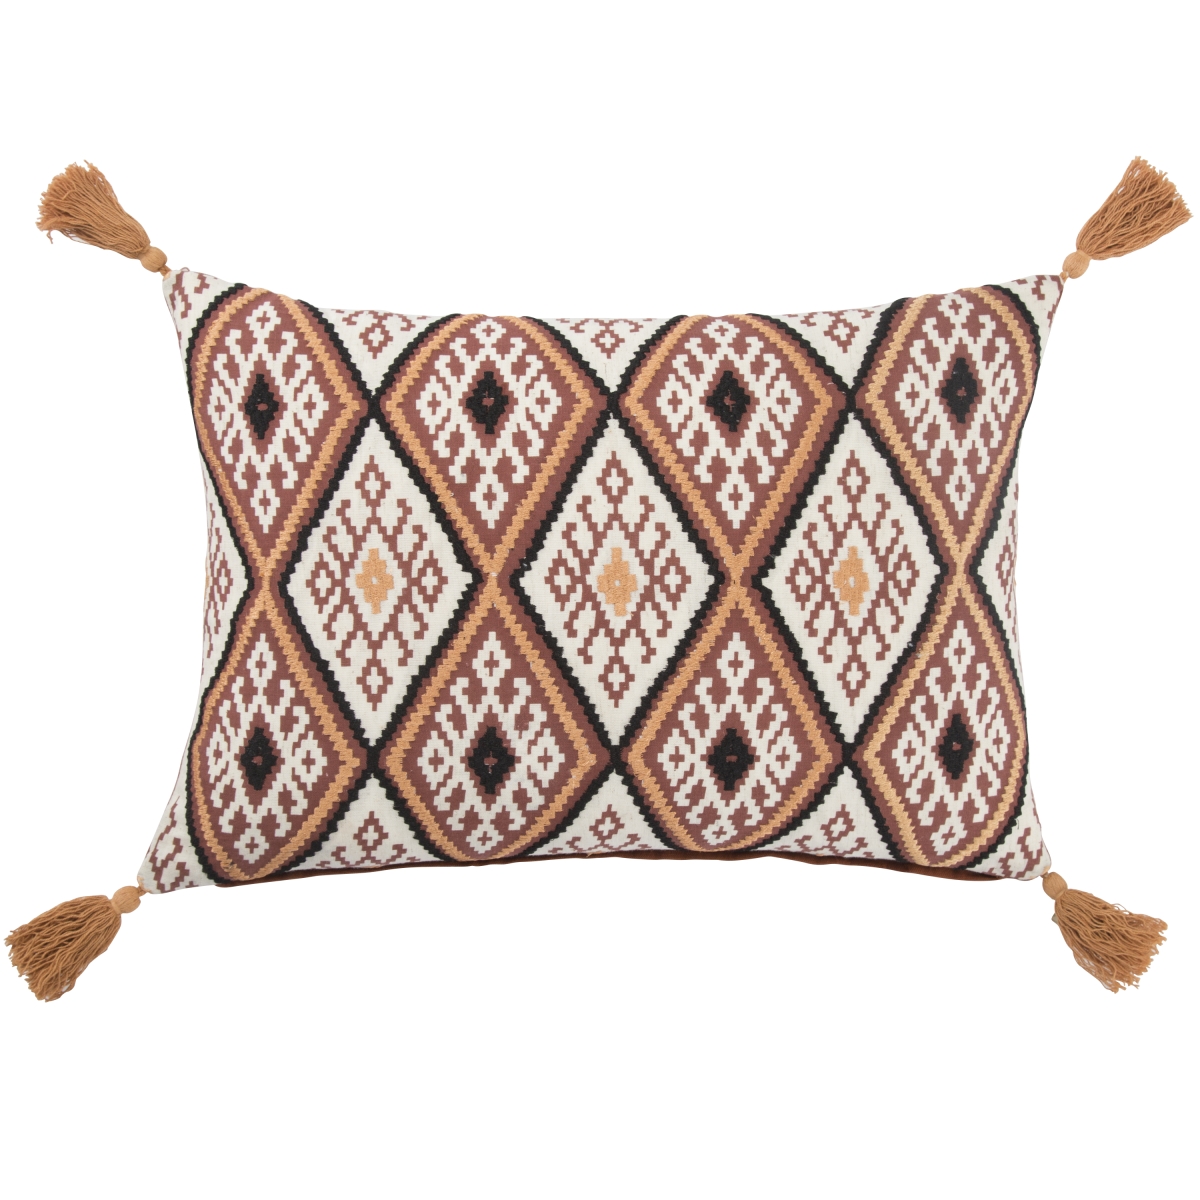 Plw102384 14 X 20 In. Traditions Made Modern Pillows Museum Ifa Yuma Orange & Black Geometric Poly Throw Pillow